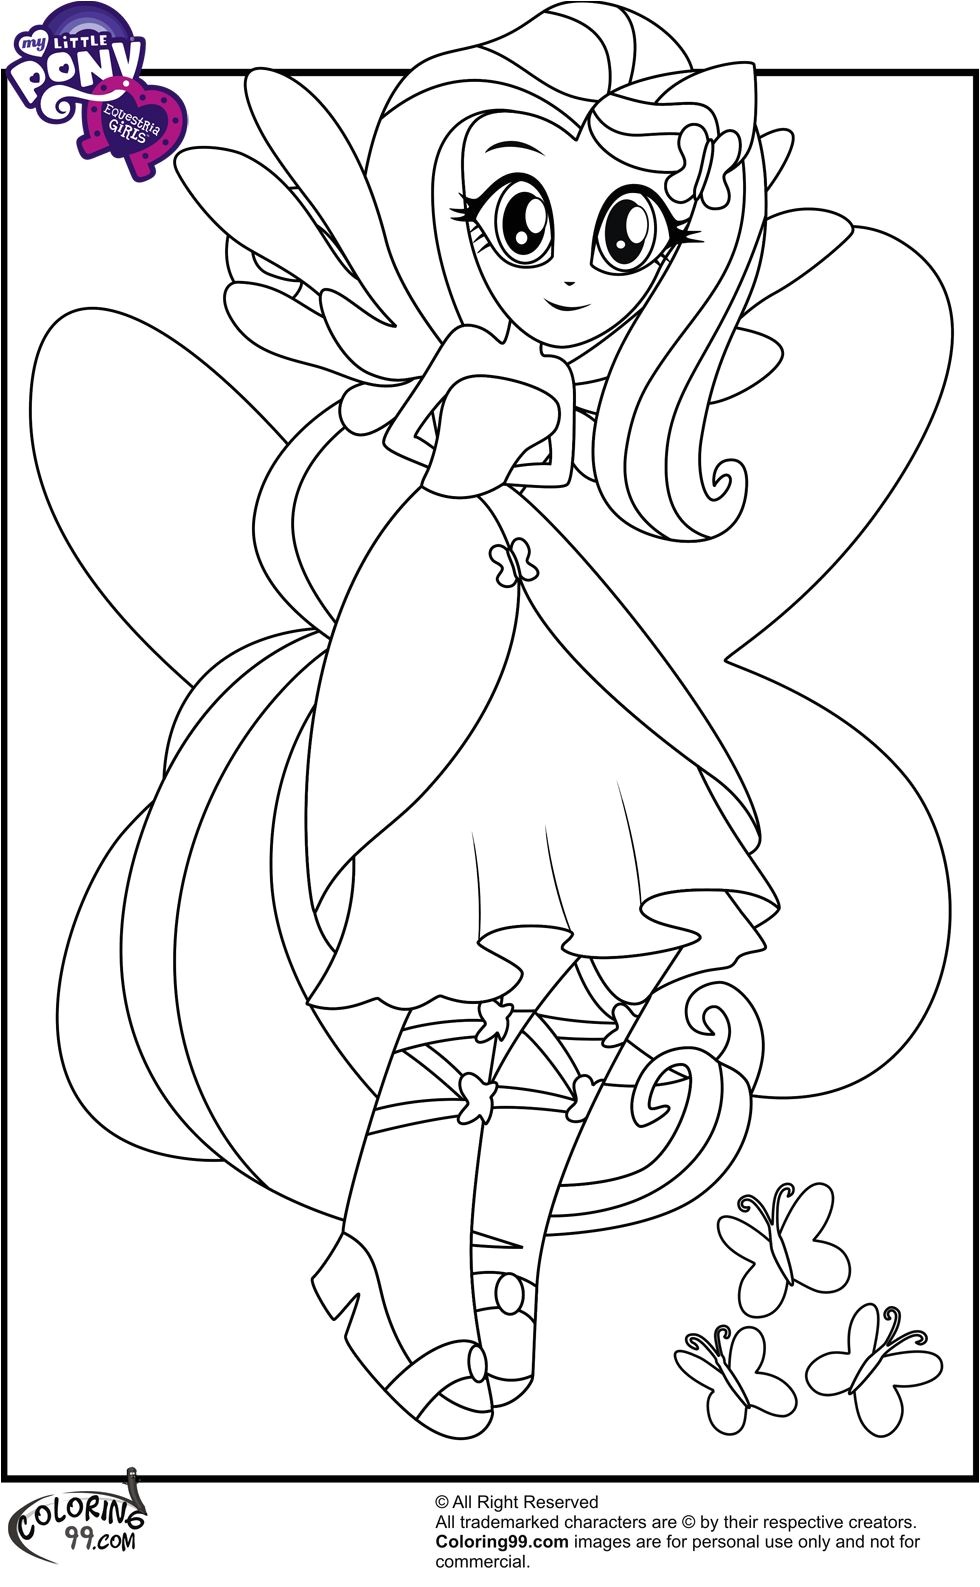 My little pony applejack free able colouring pages Google Search